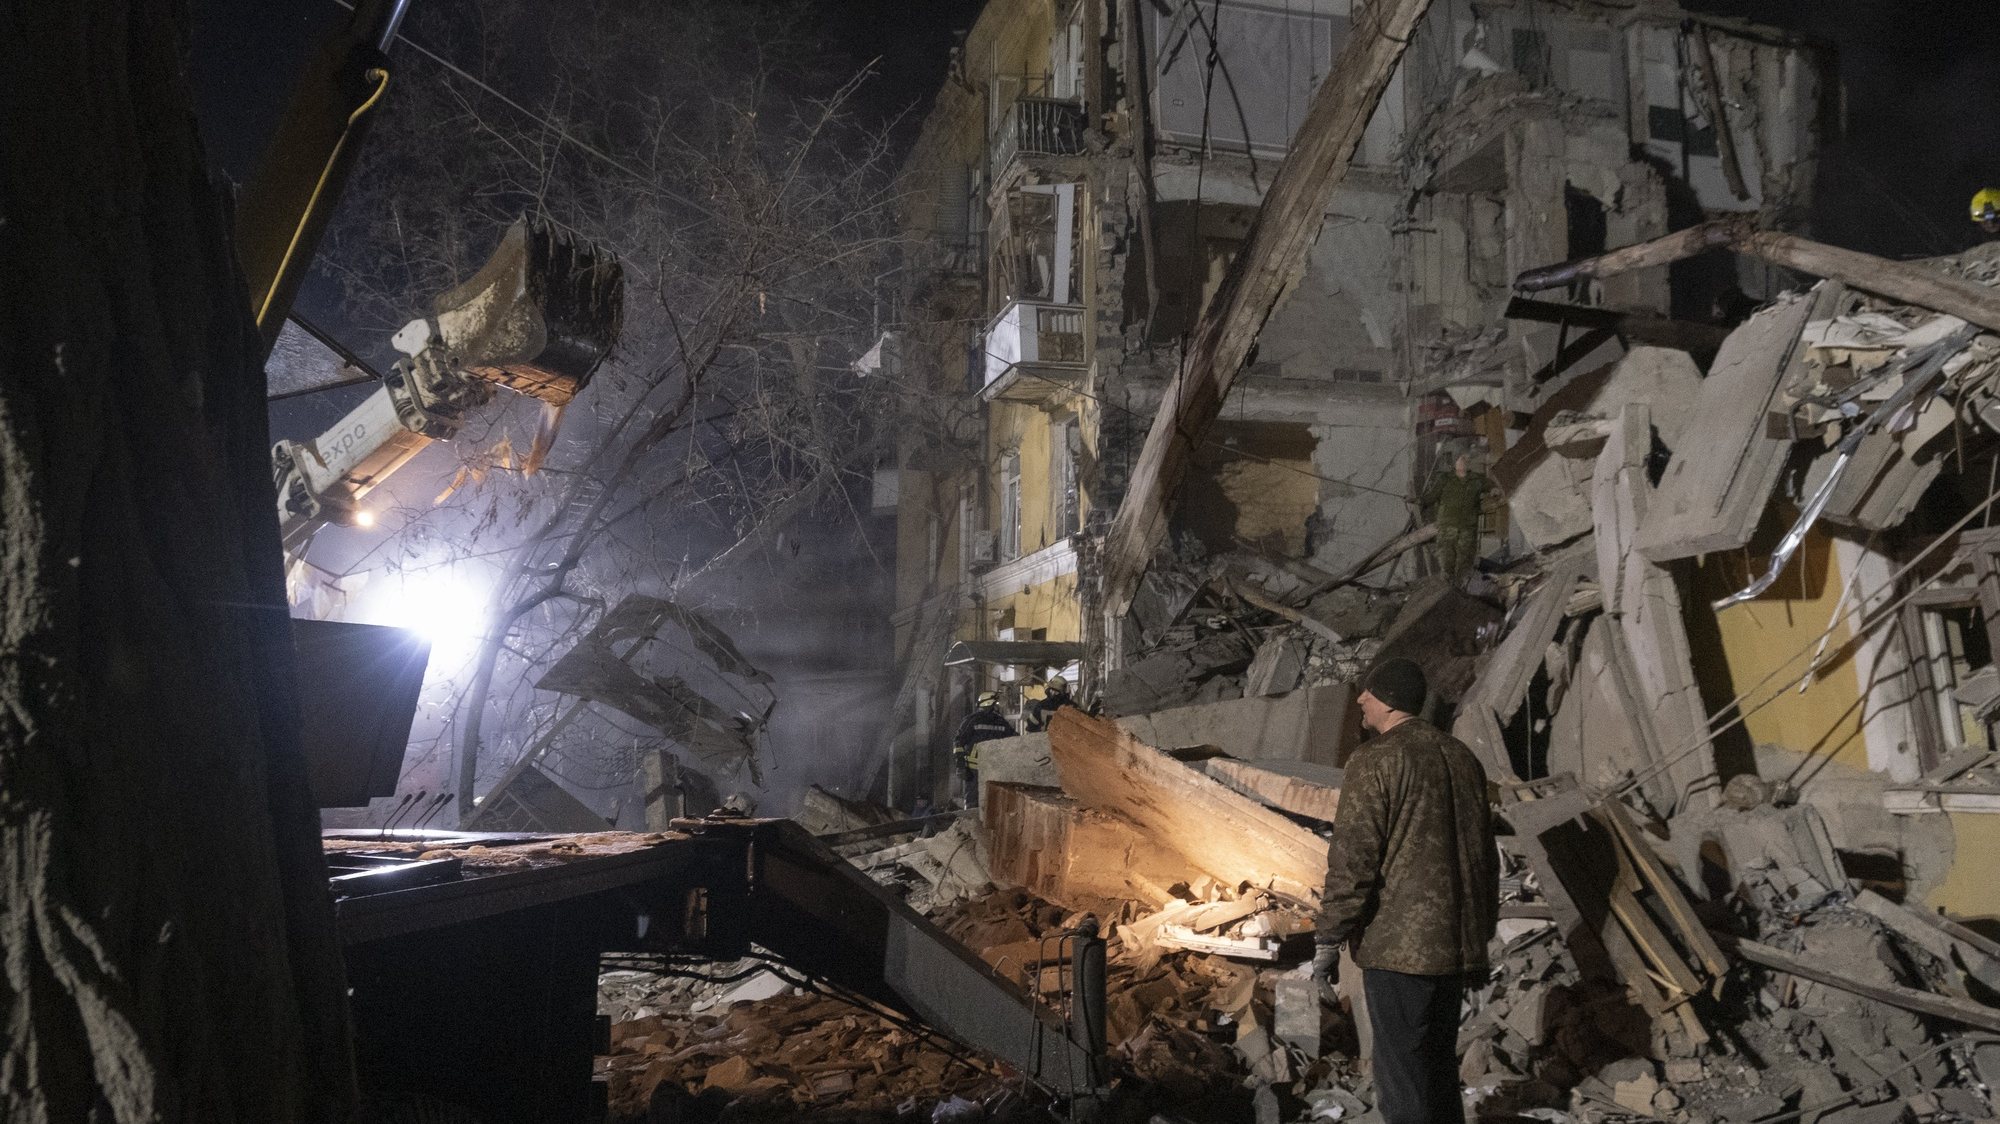 epa10443794 Ukrainian rescuers work on site following an overnight misssile strike on a residential district in Kramatorsk, Ukraine, early 02 February 2023. At least three people were killed and 21 injured, according to the Ukrainian Emergency Service (SES). Russian troops entered Ukraine territory on 24 February 2022 starting a conflict that has provoked destruction and a humanitarian crisis.  EPA/SERGEY SHESTAK